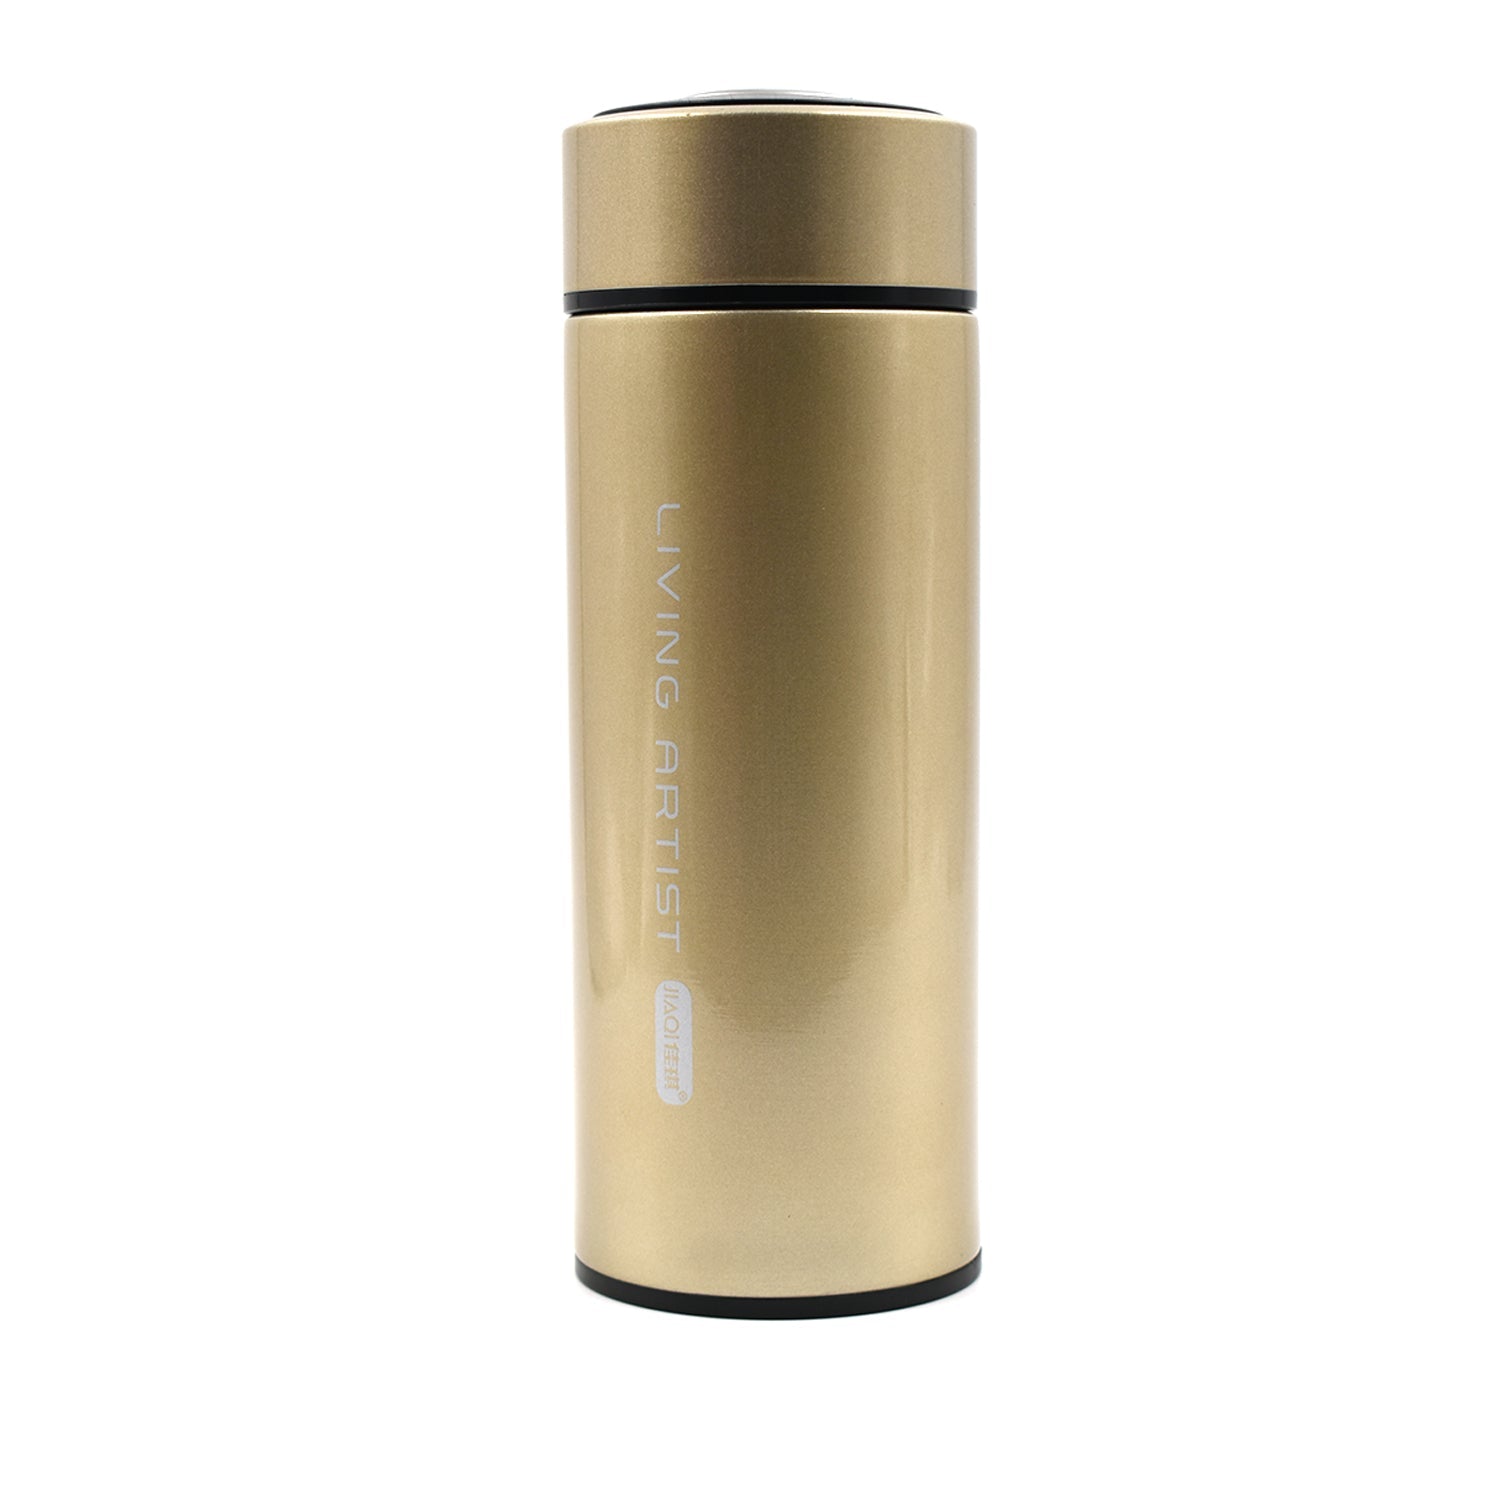 6418 Stainless steel Bottles 500Ml Approx. For Storing Water And Some Other Types Of Beverages Etc.